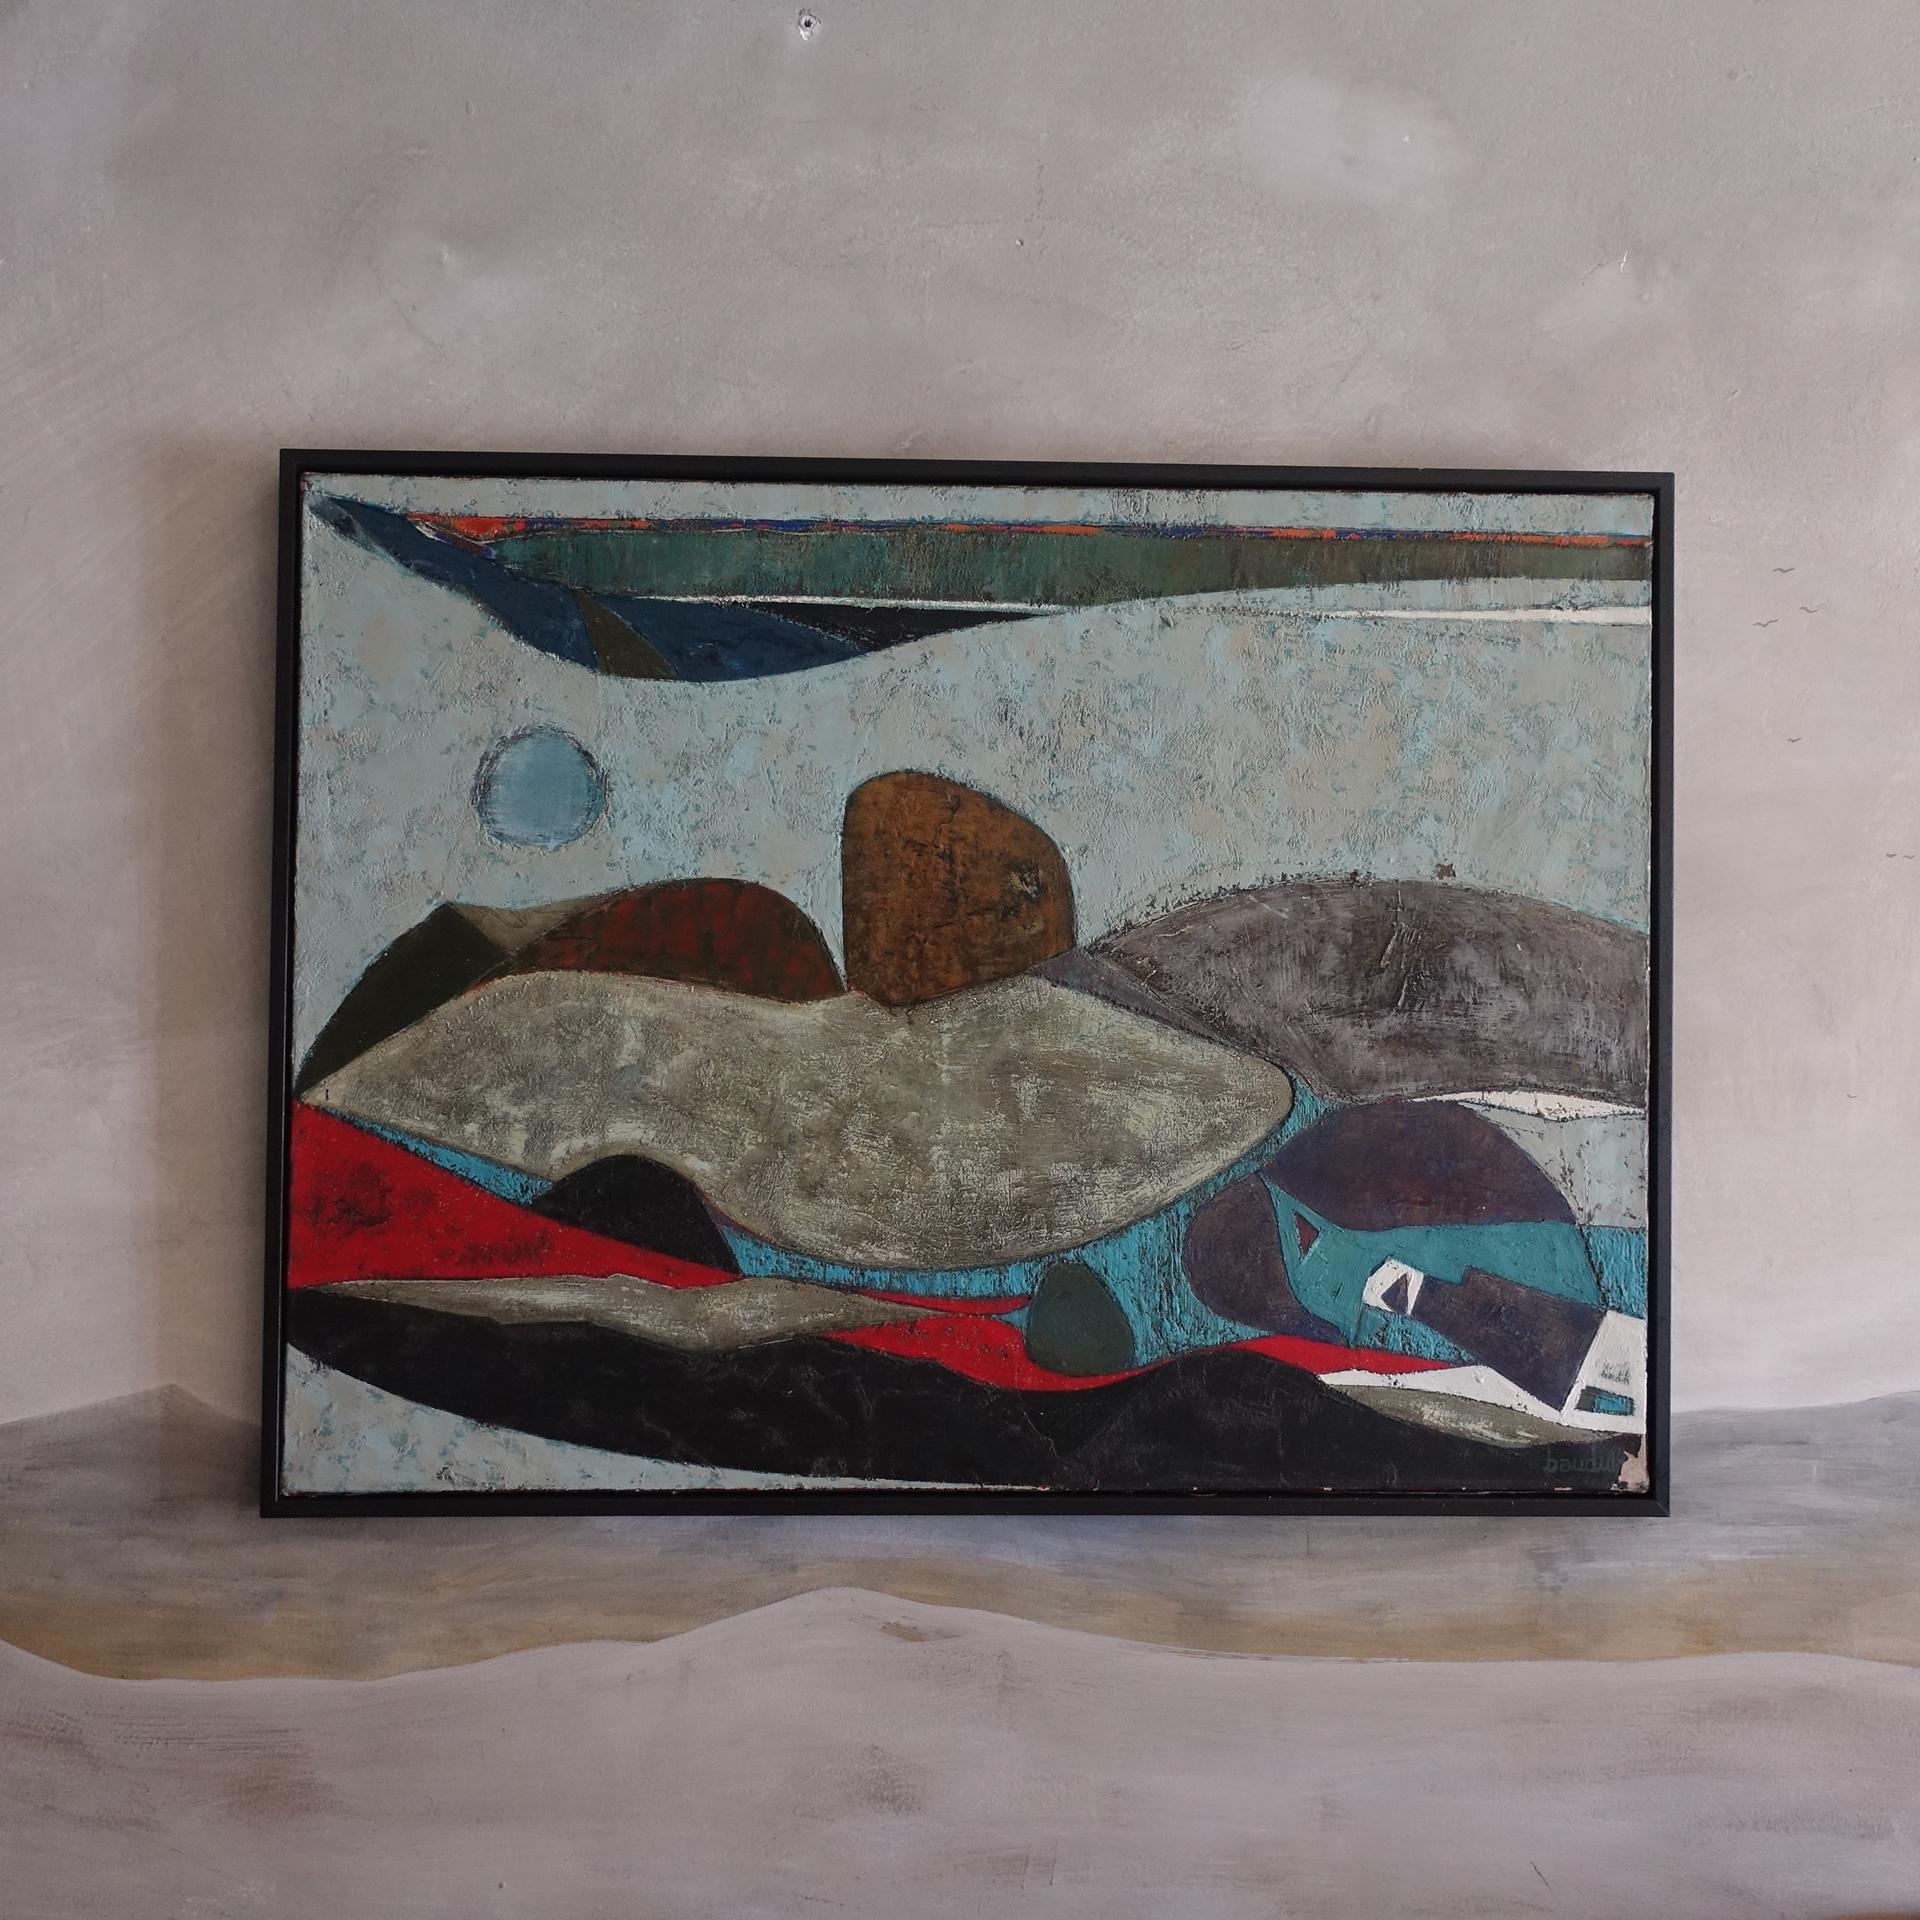 One of a kind abstract painting in cubist style, mixed media, wood frame, vintage patina, France 1960's circa.